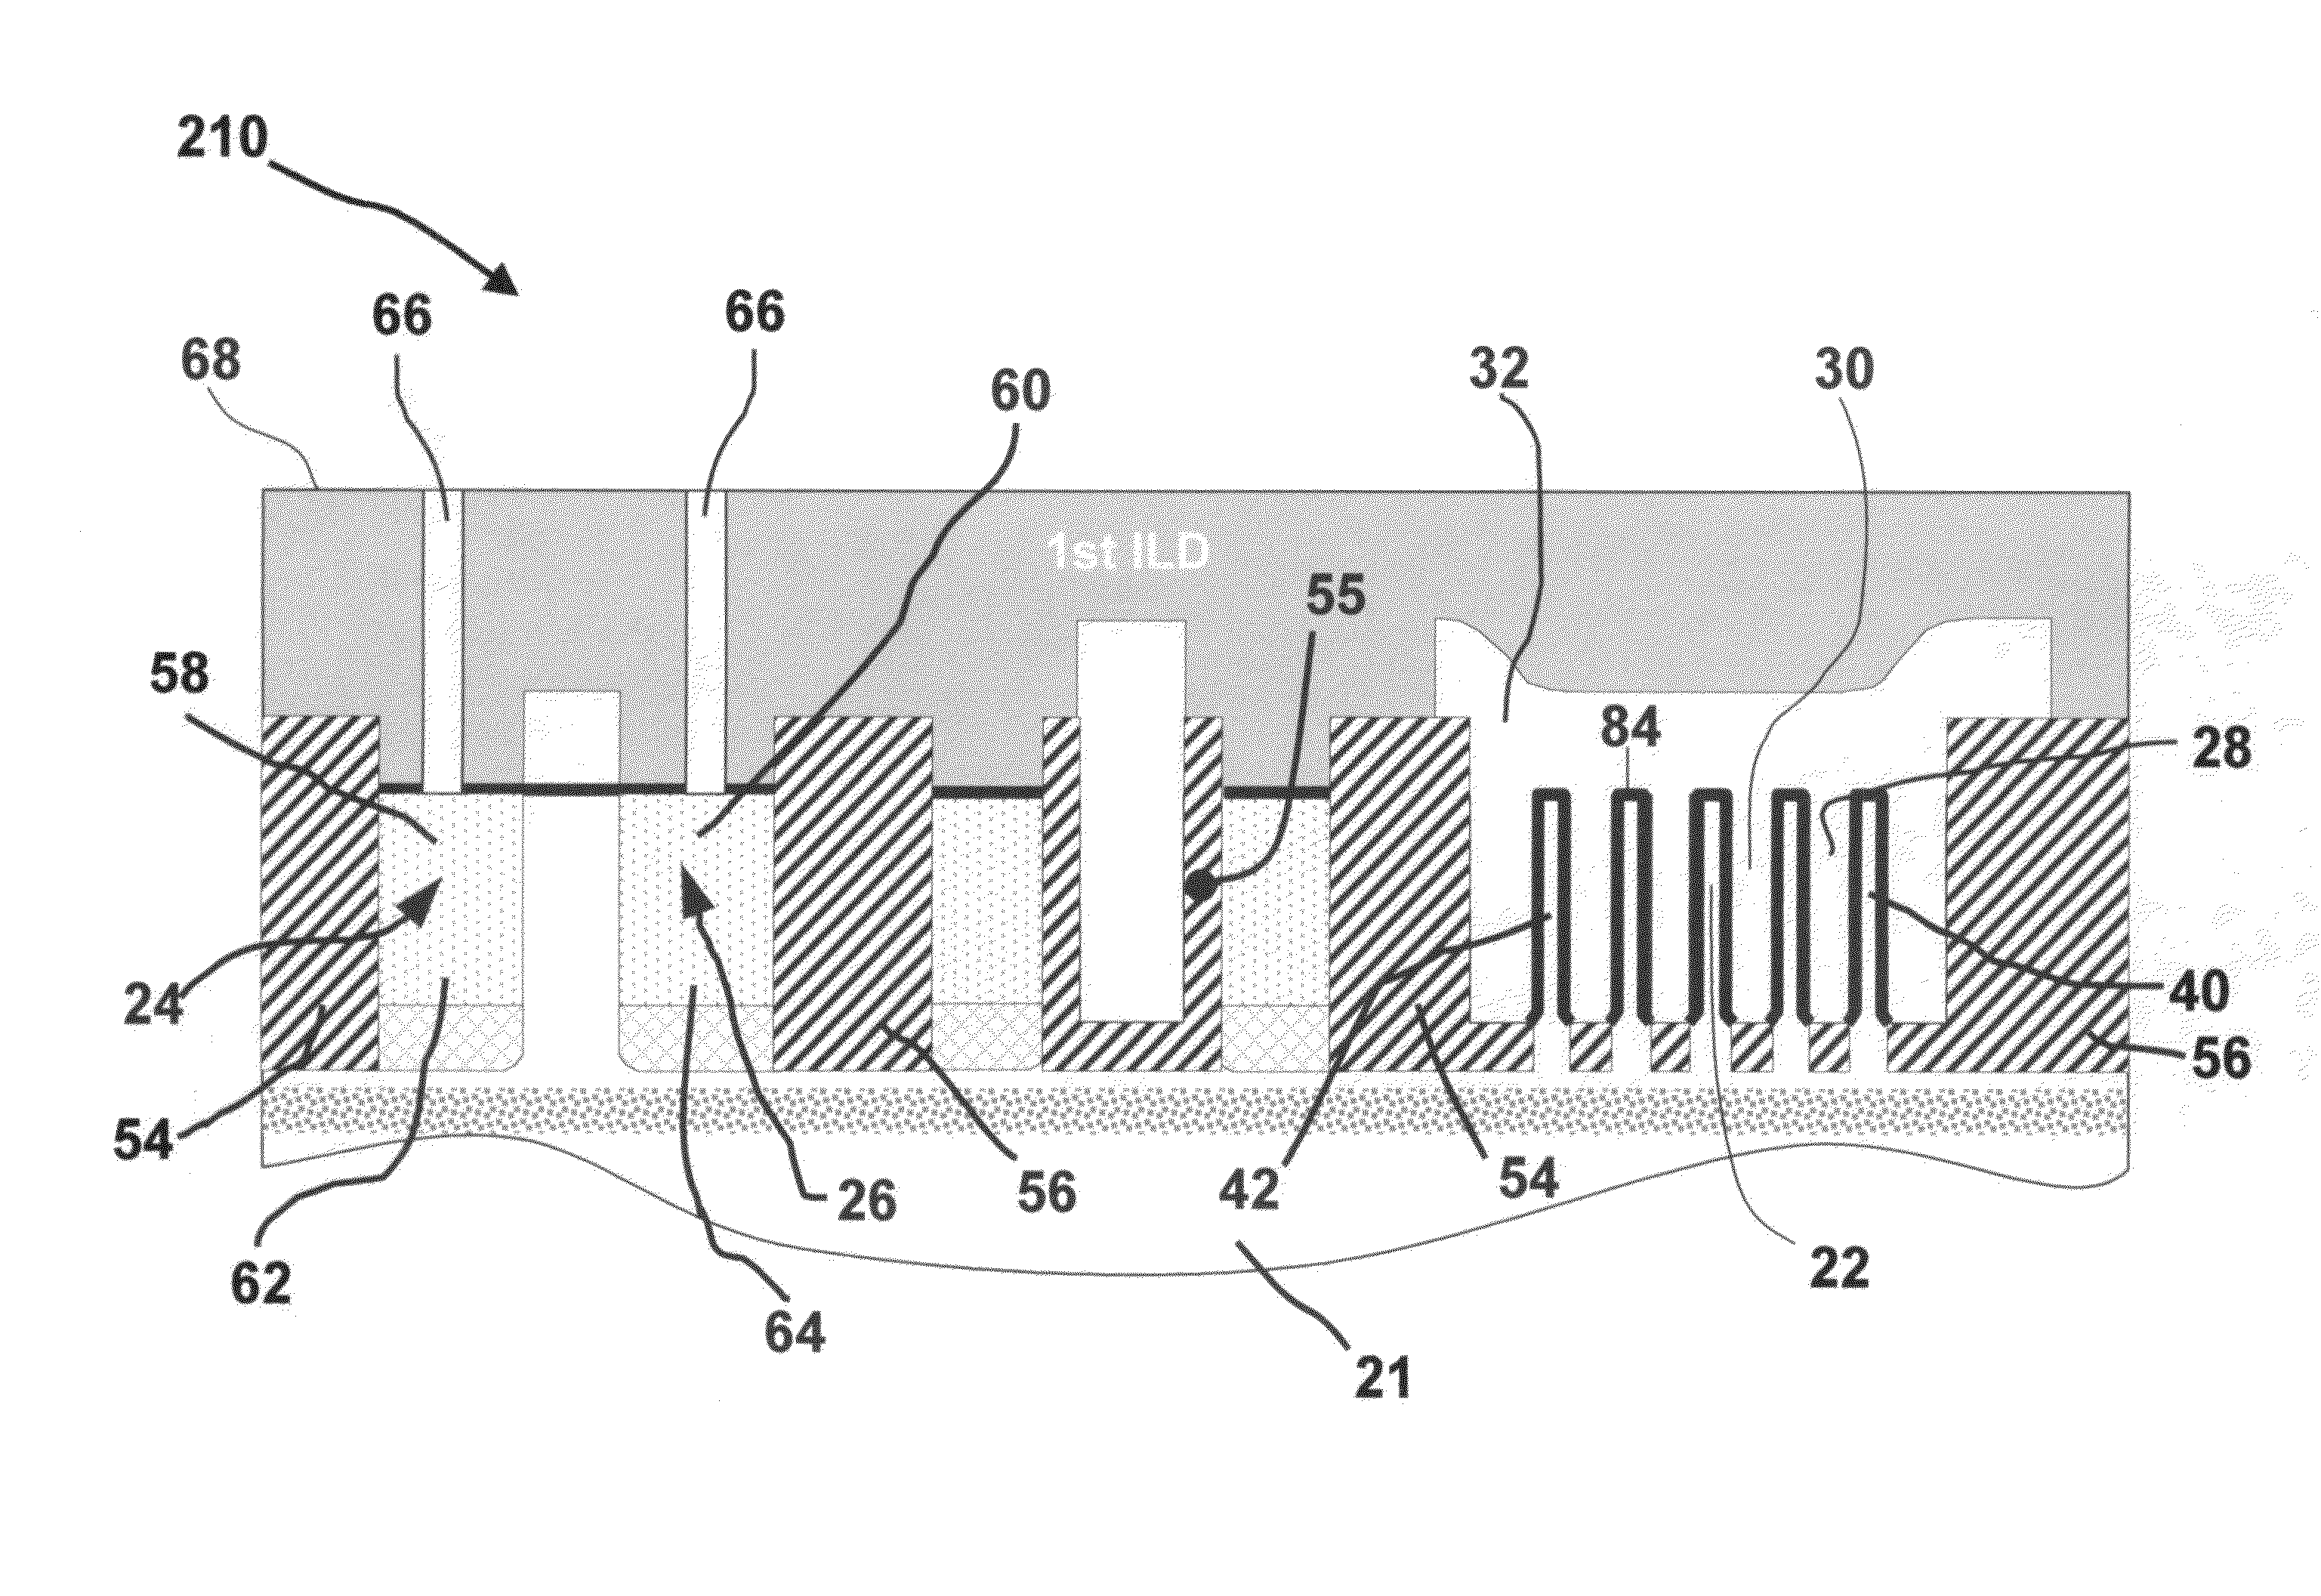 Castellated gate MOSFET device capable of fully-depleted operation